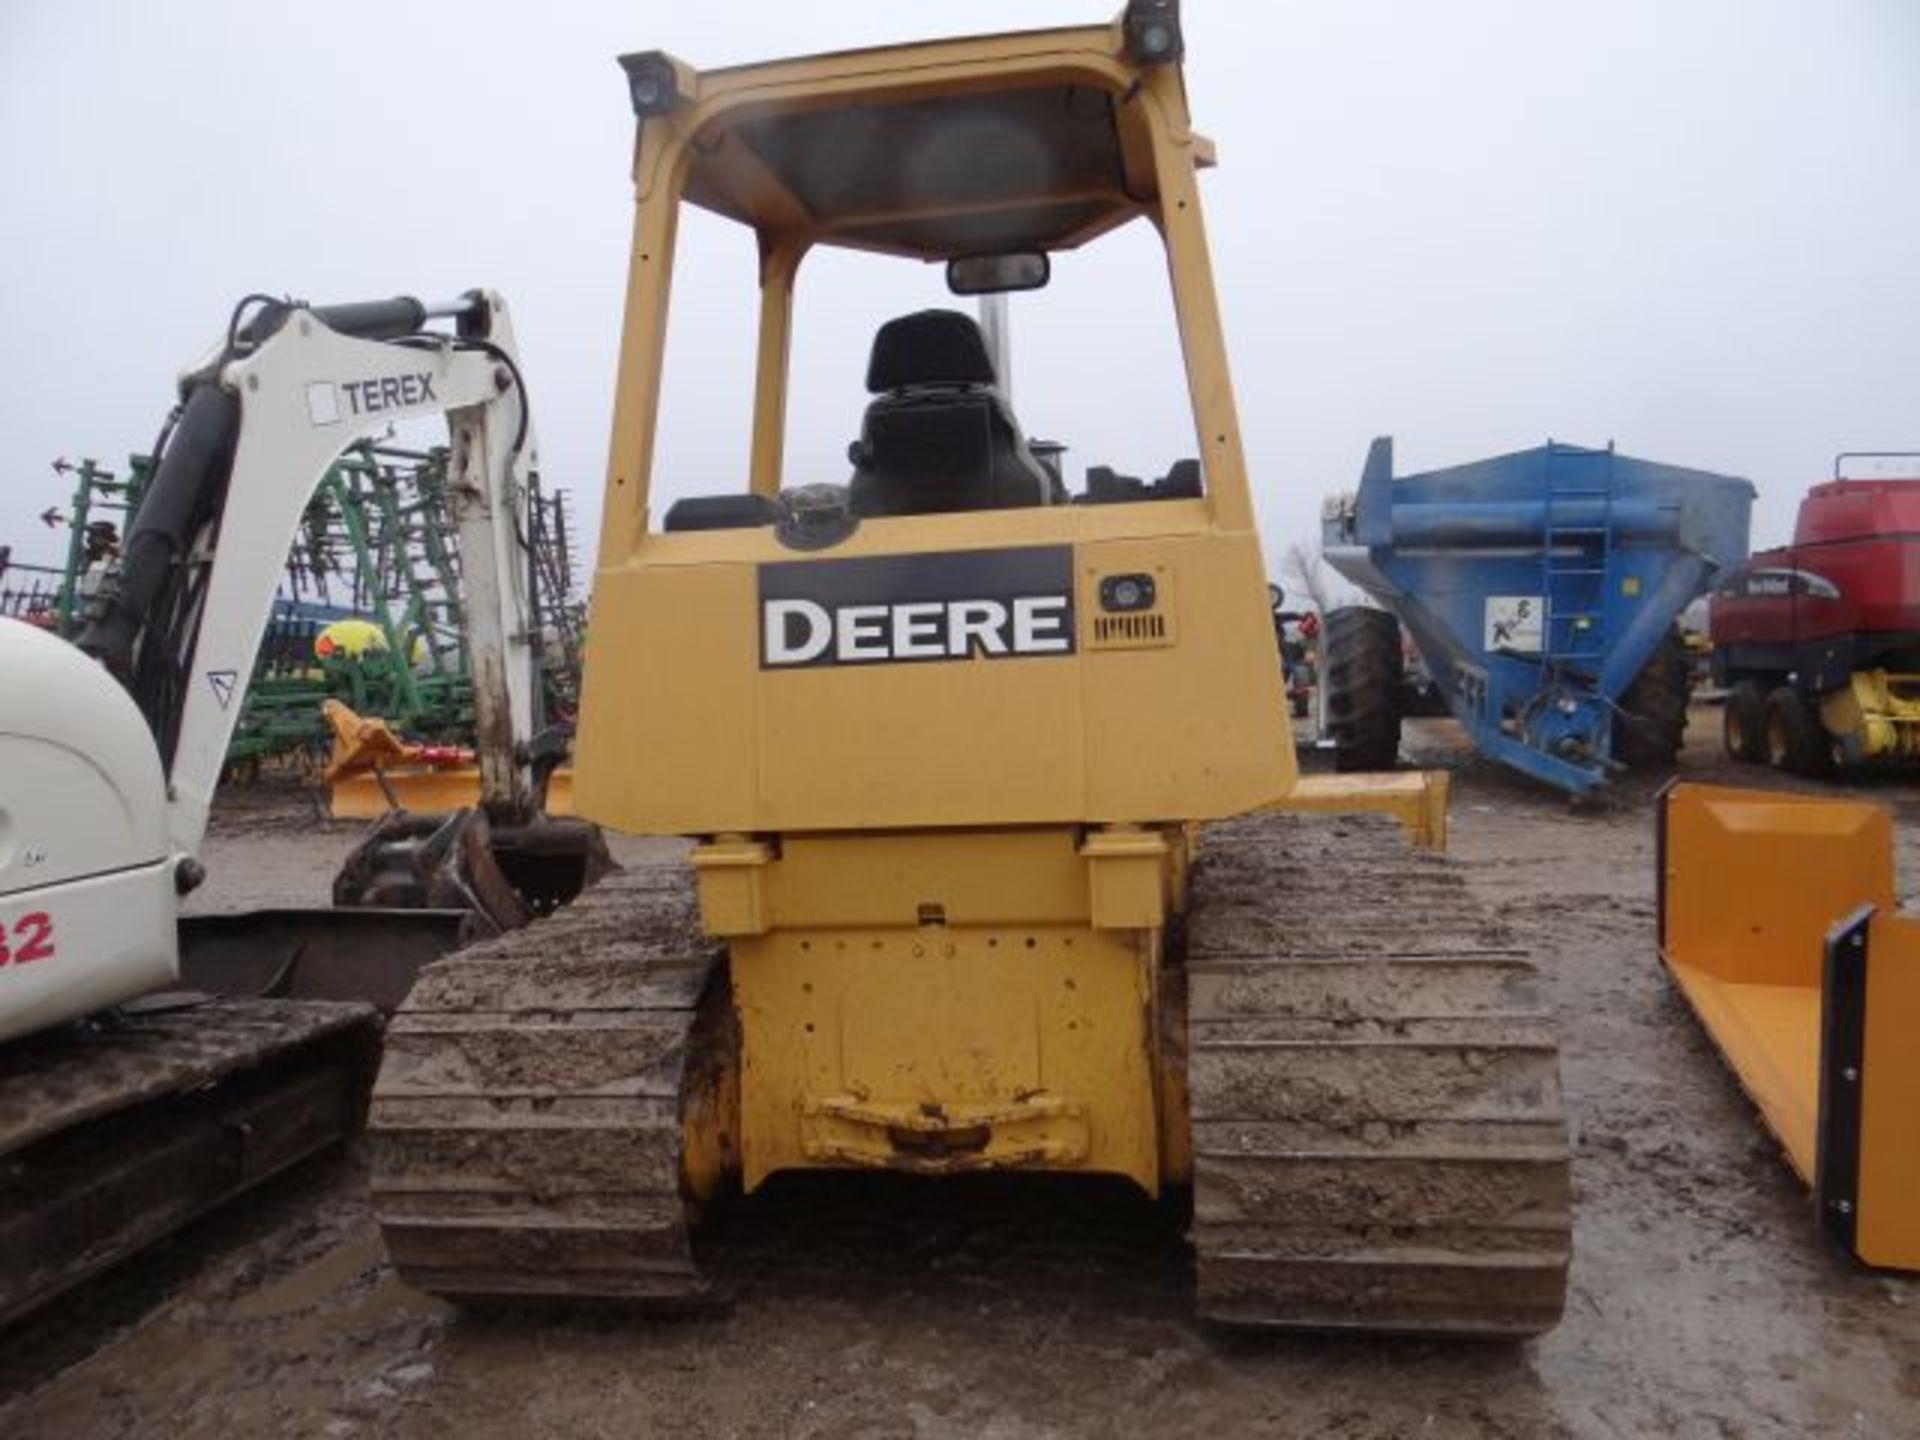 JD 650J LPG Dozer, 2006 5100 hrs, 6-Way PAT Blade, 60% Undercarriage, Farmer Owned - Image 3 of 3